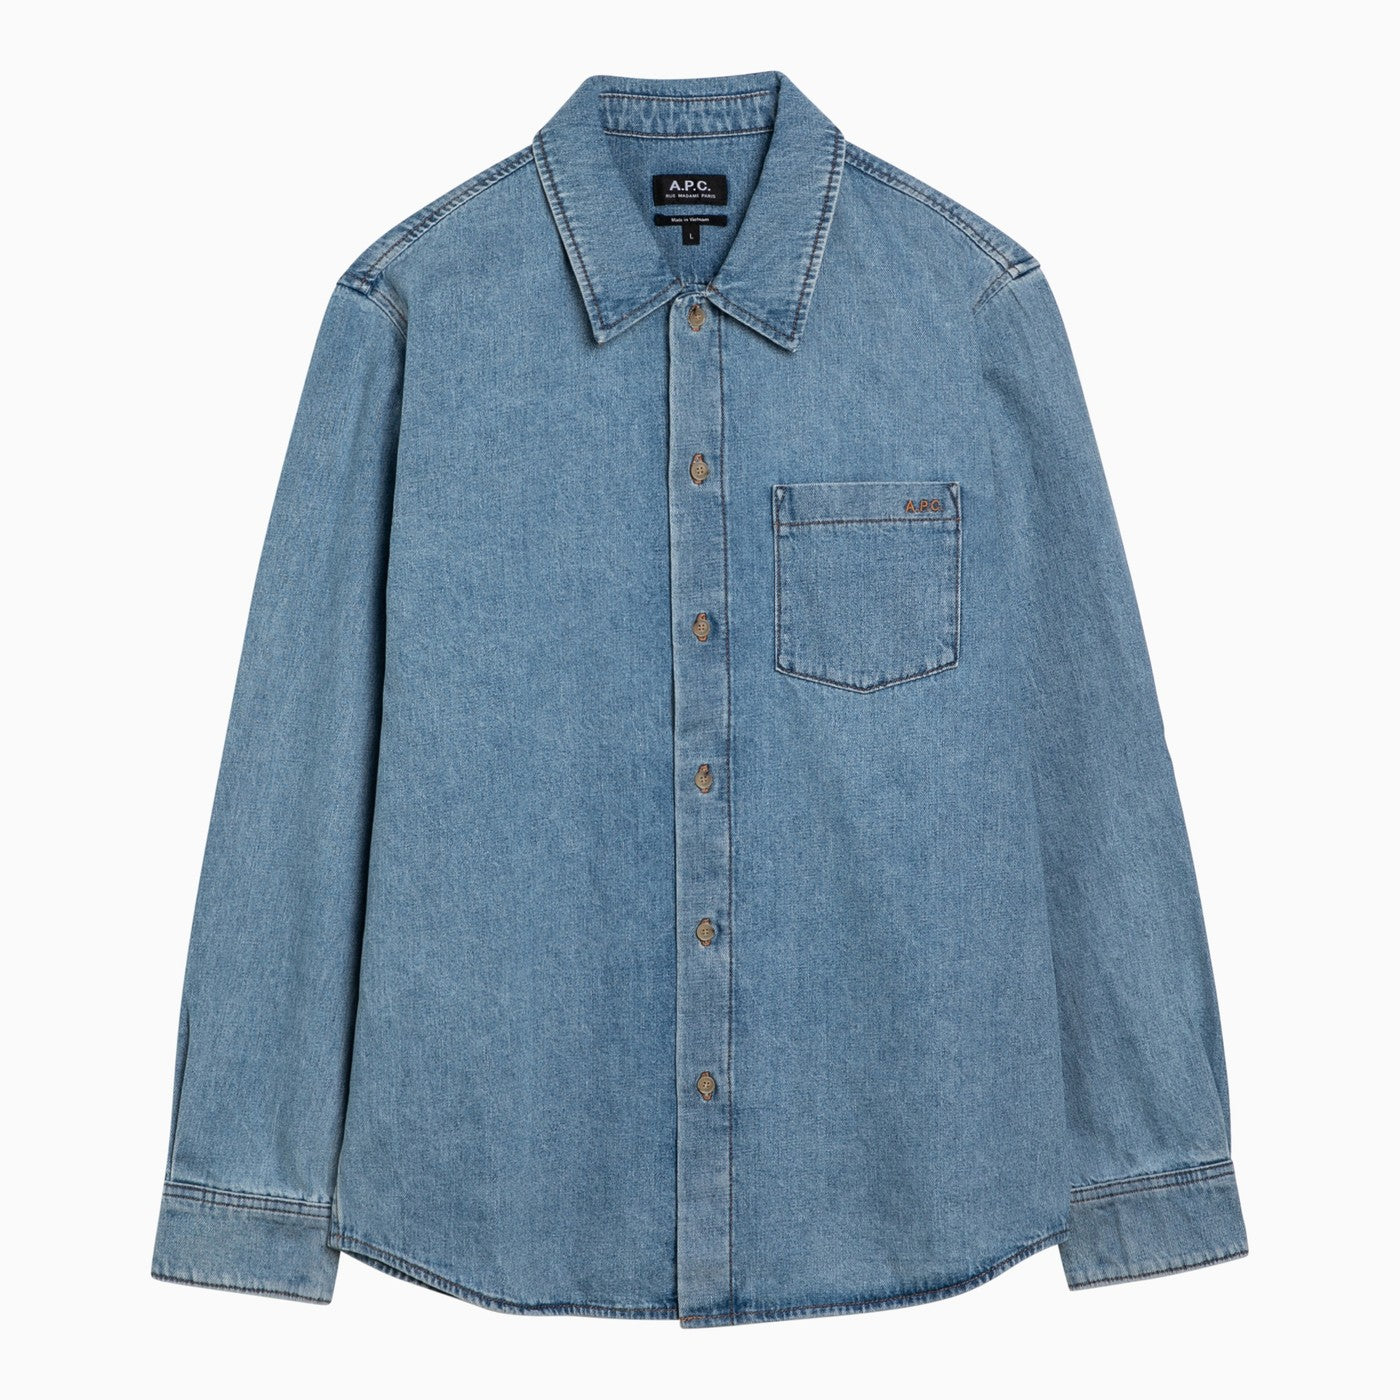 A.P.C. Denim Shirt With Embroidery - XL